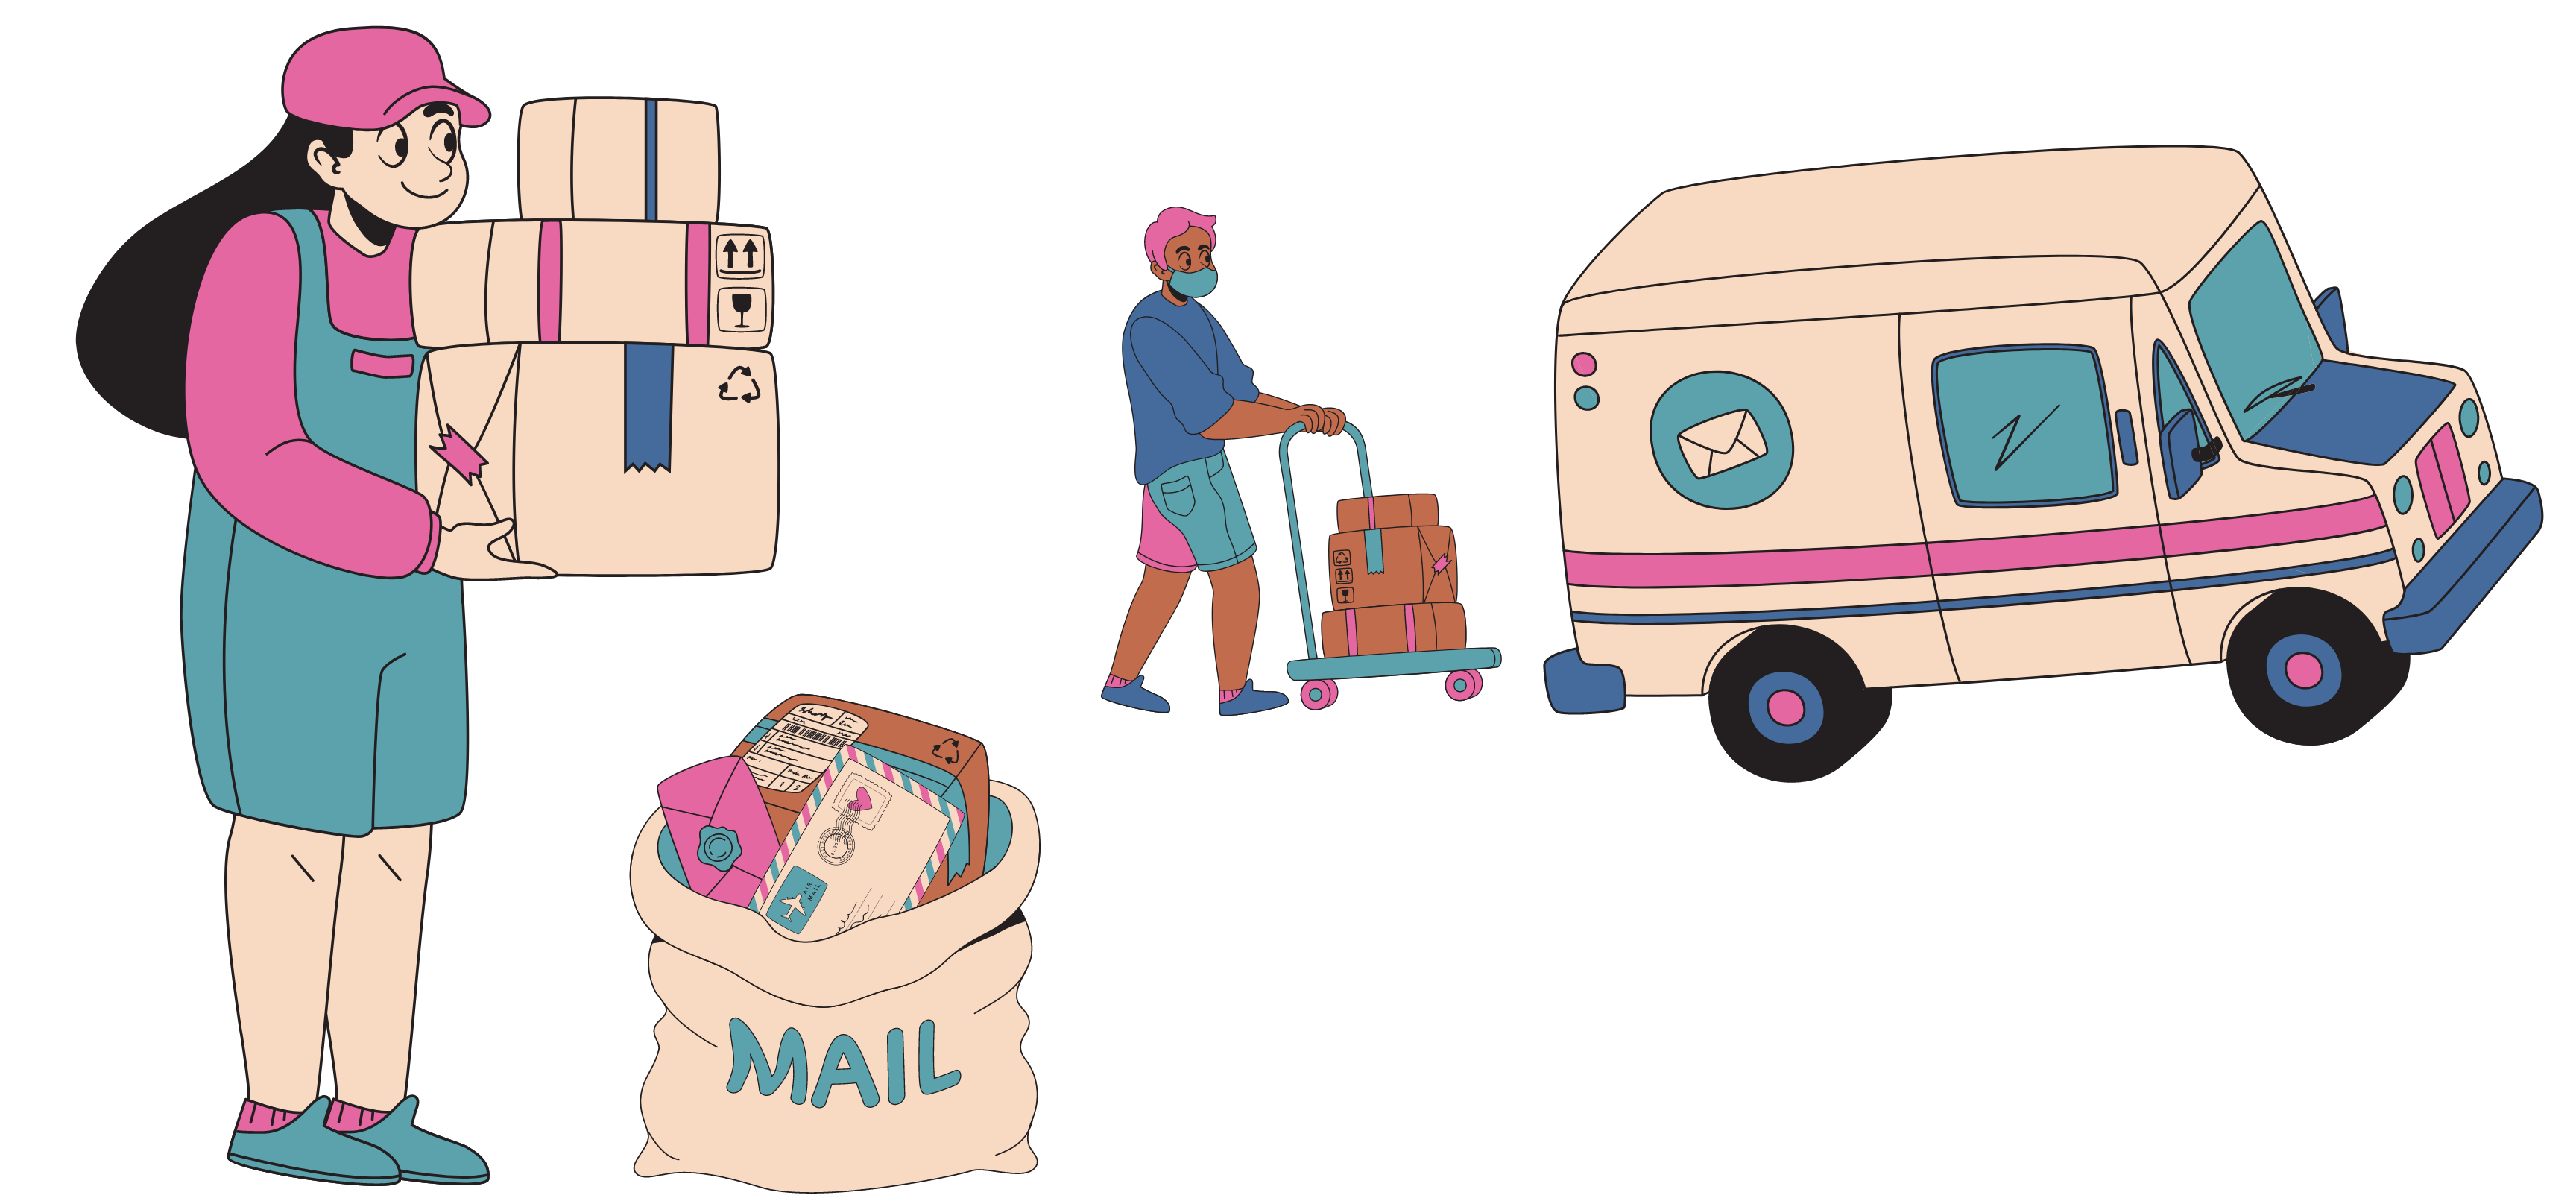 Switch Plate Cover Delivery: Clip-art of mail workers handling packages next to a mail bag and a person loading a delivery truck.